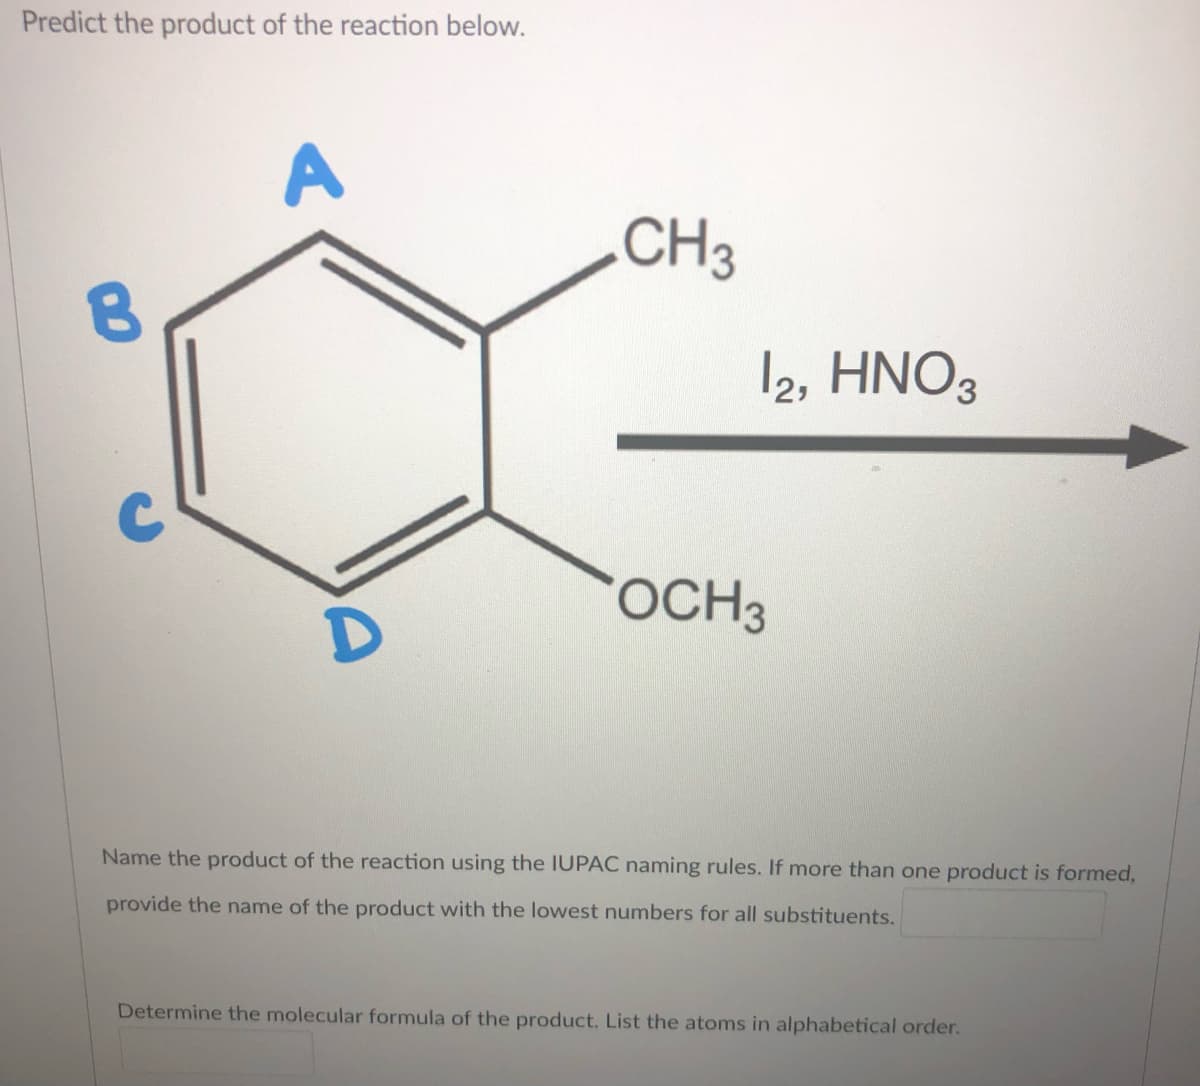 Predict the product of the reaction below.
A
.CH3
12, HNO3
OCH3
Name the product of the reaction using the IUPAC naming rules. If more than one product is formed,
provide the name of the product with the lowest numbers for all substituents.
Determine the molecular formula of the product. List the atoms in alphabetical order.
